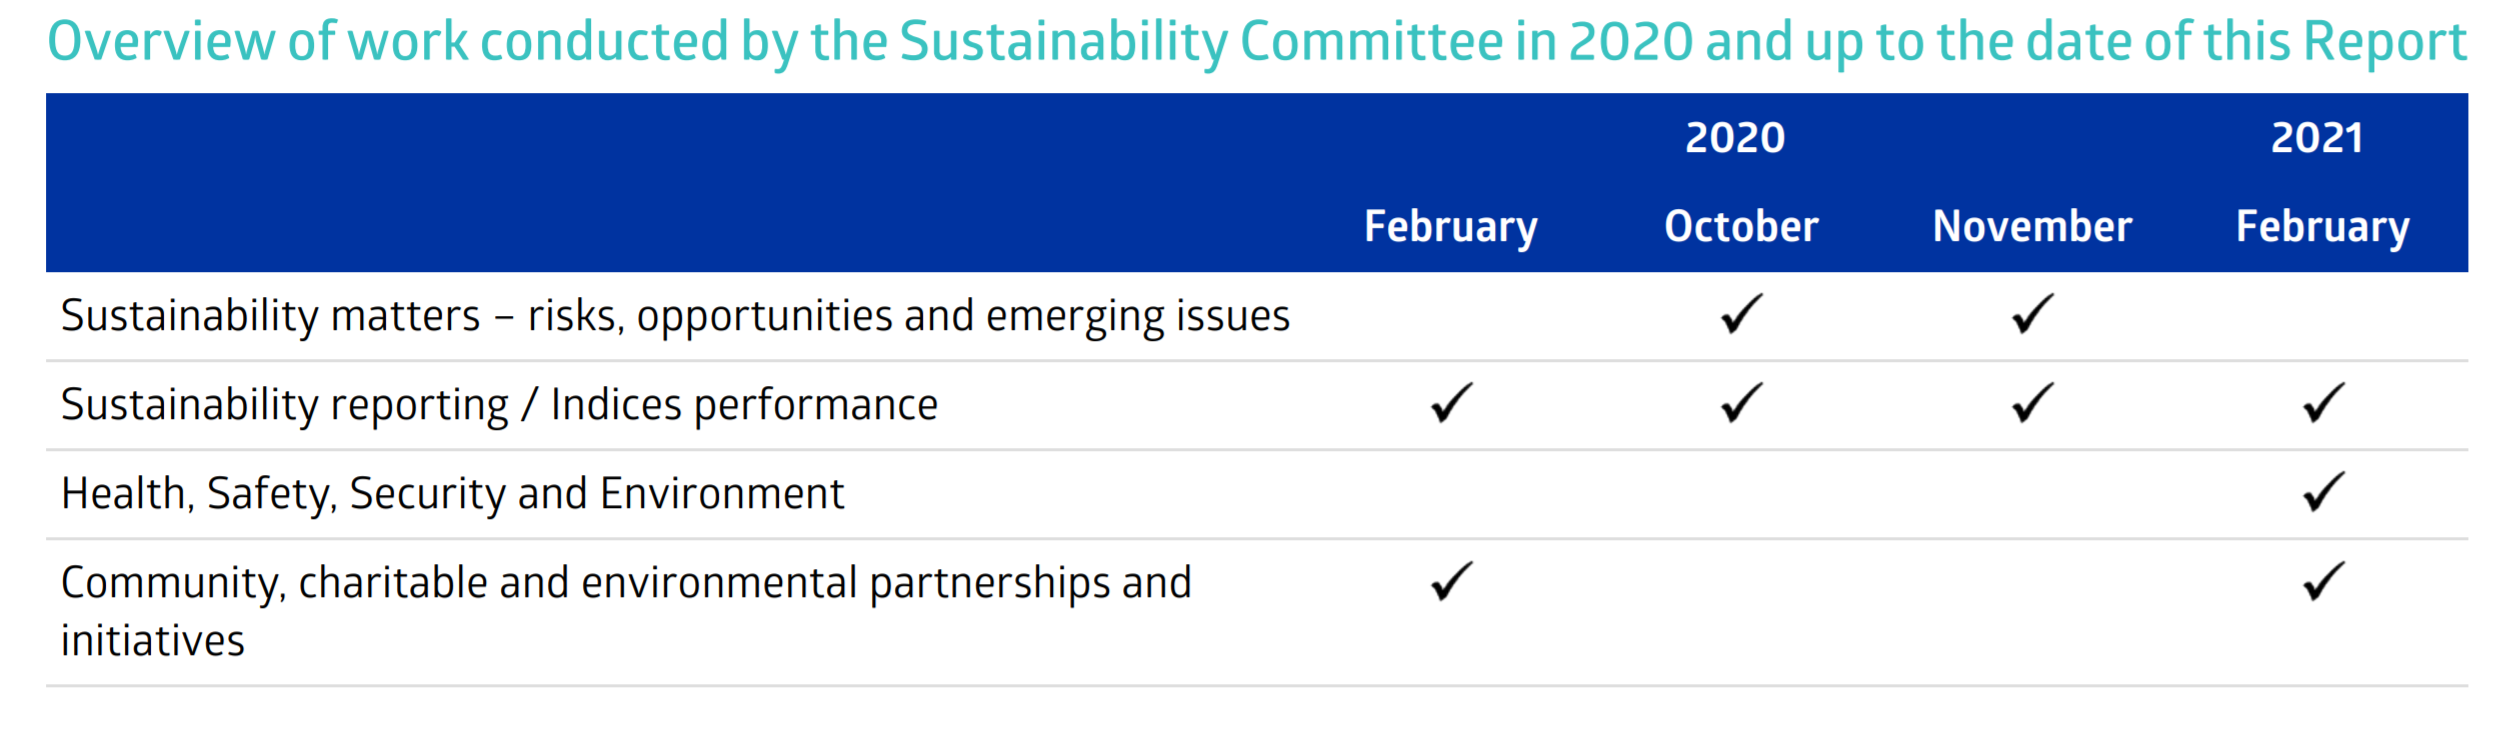 CLP Sustainability Report 2020_2